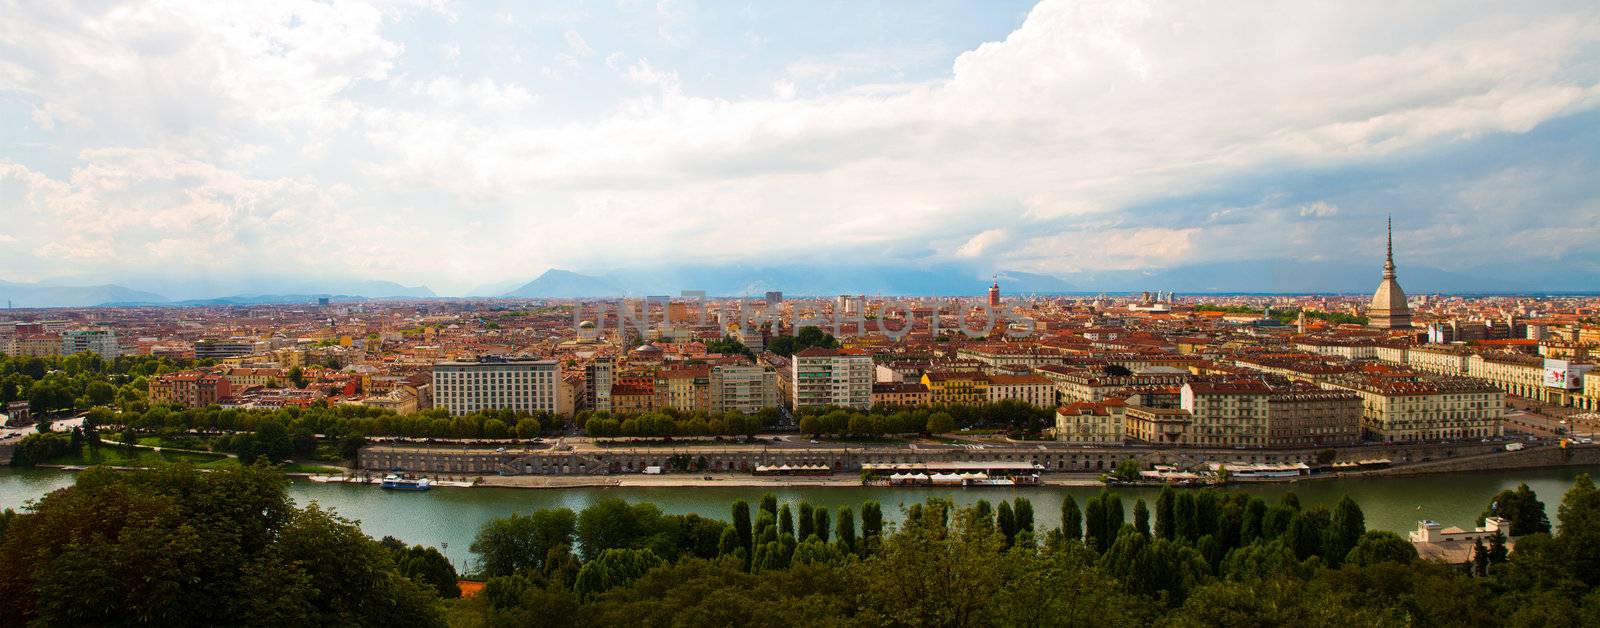 a view of turin by lsantilli